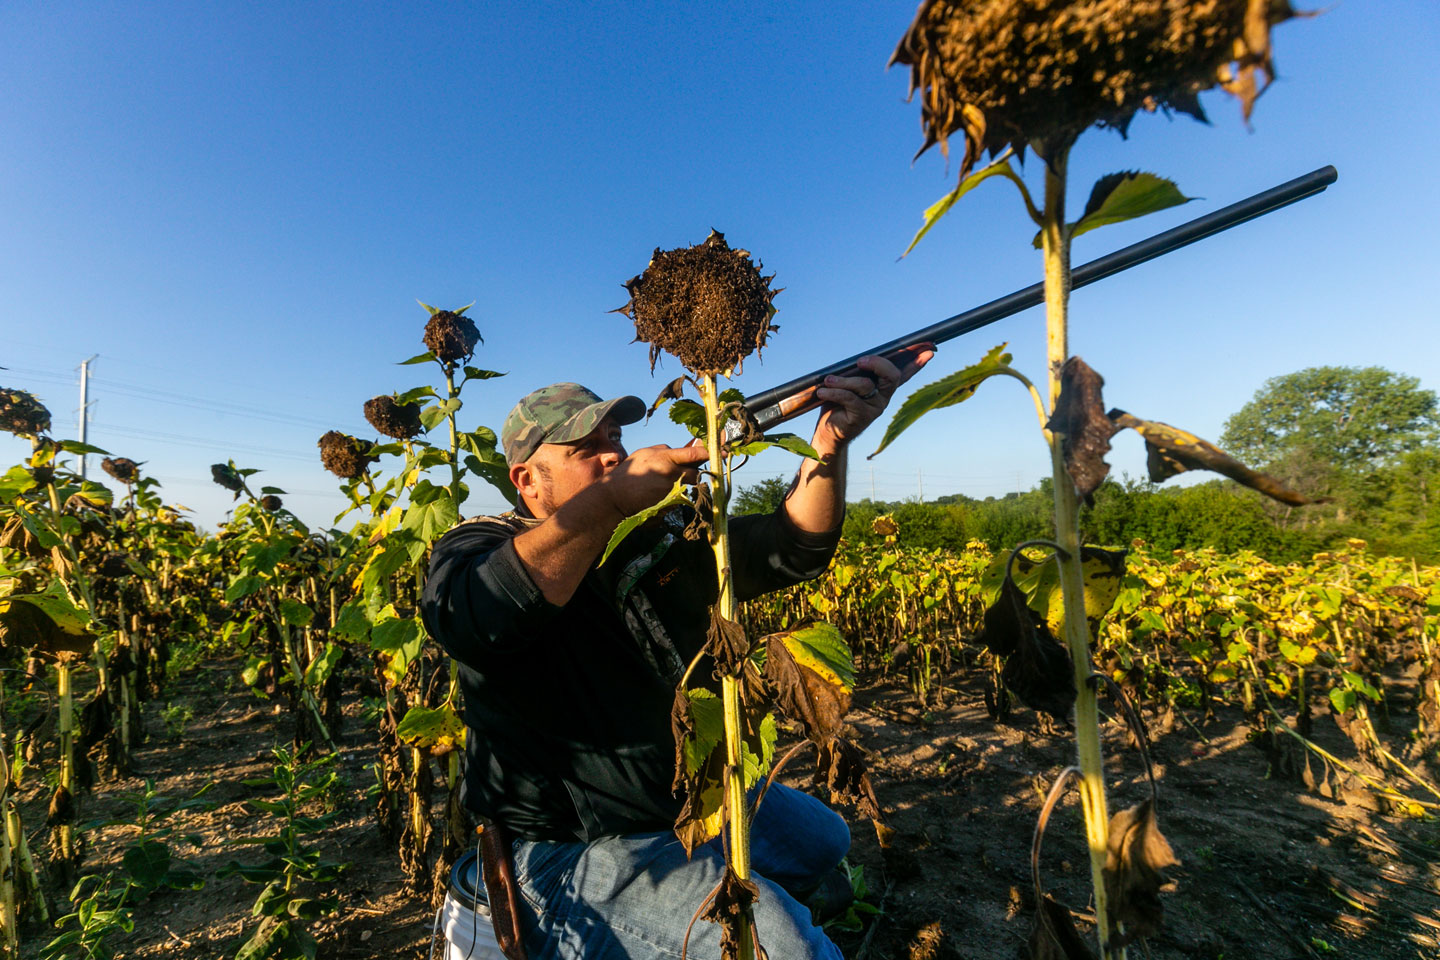 A man stands among full-grown sunflowers shooting at doves in the sky.